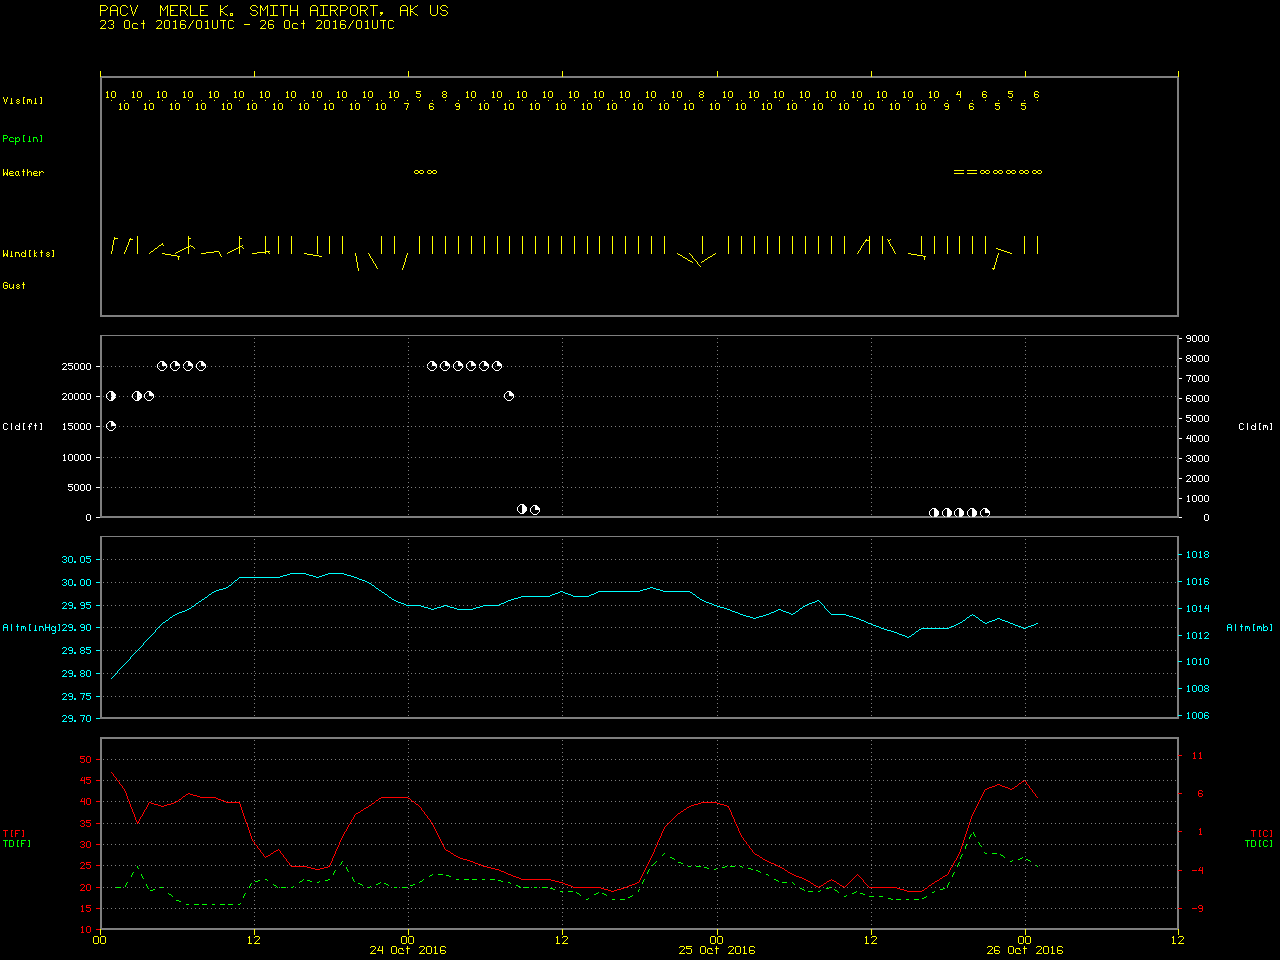 Time series of surface observations at Cordova, Alaska [click to enlarge]